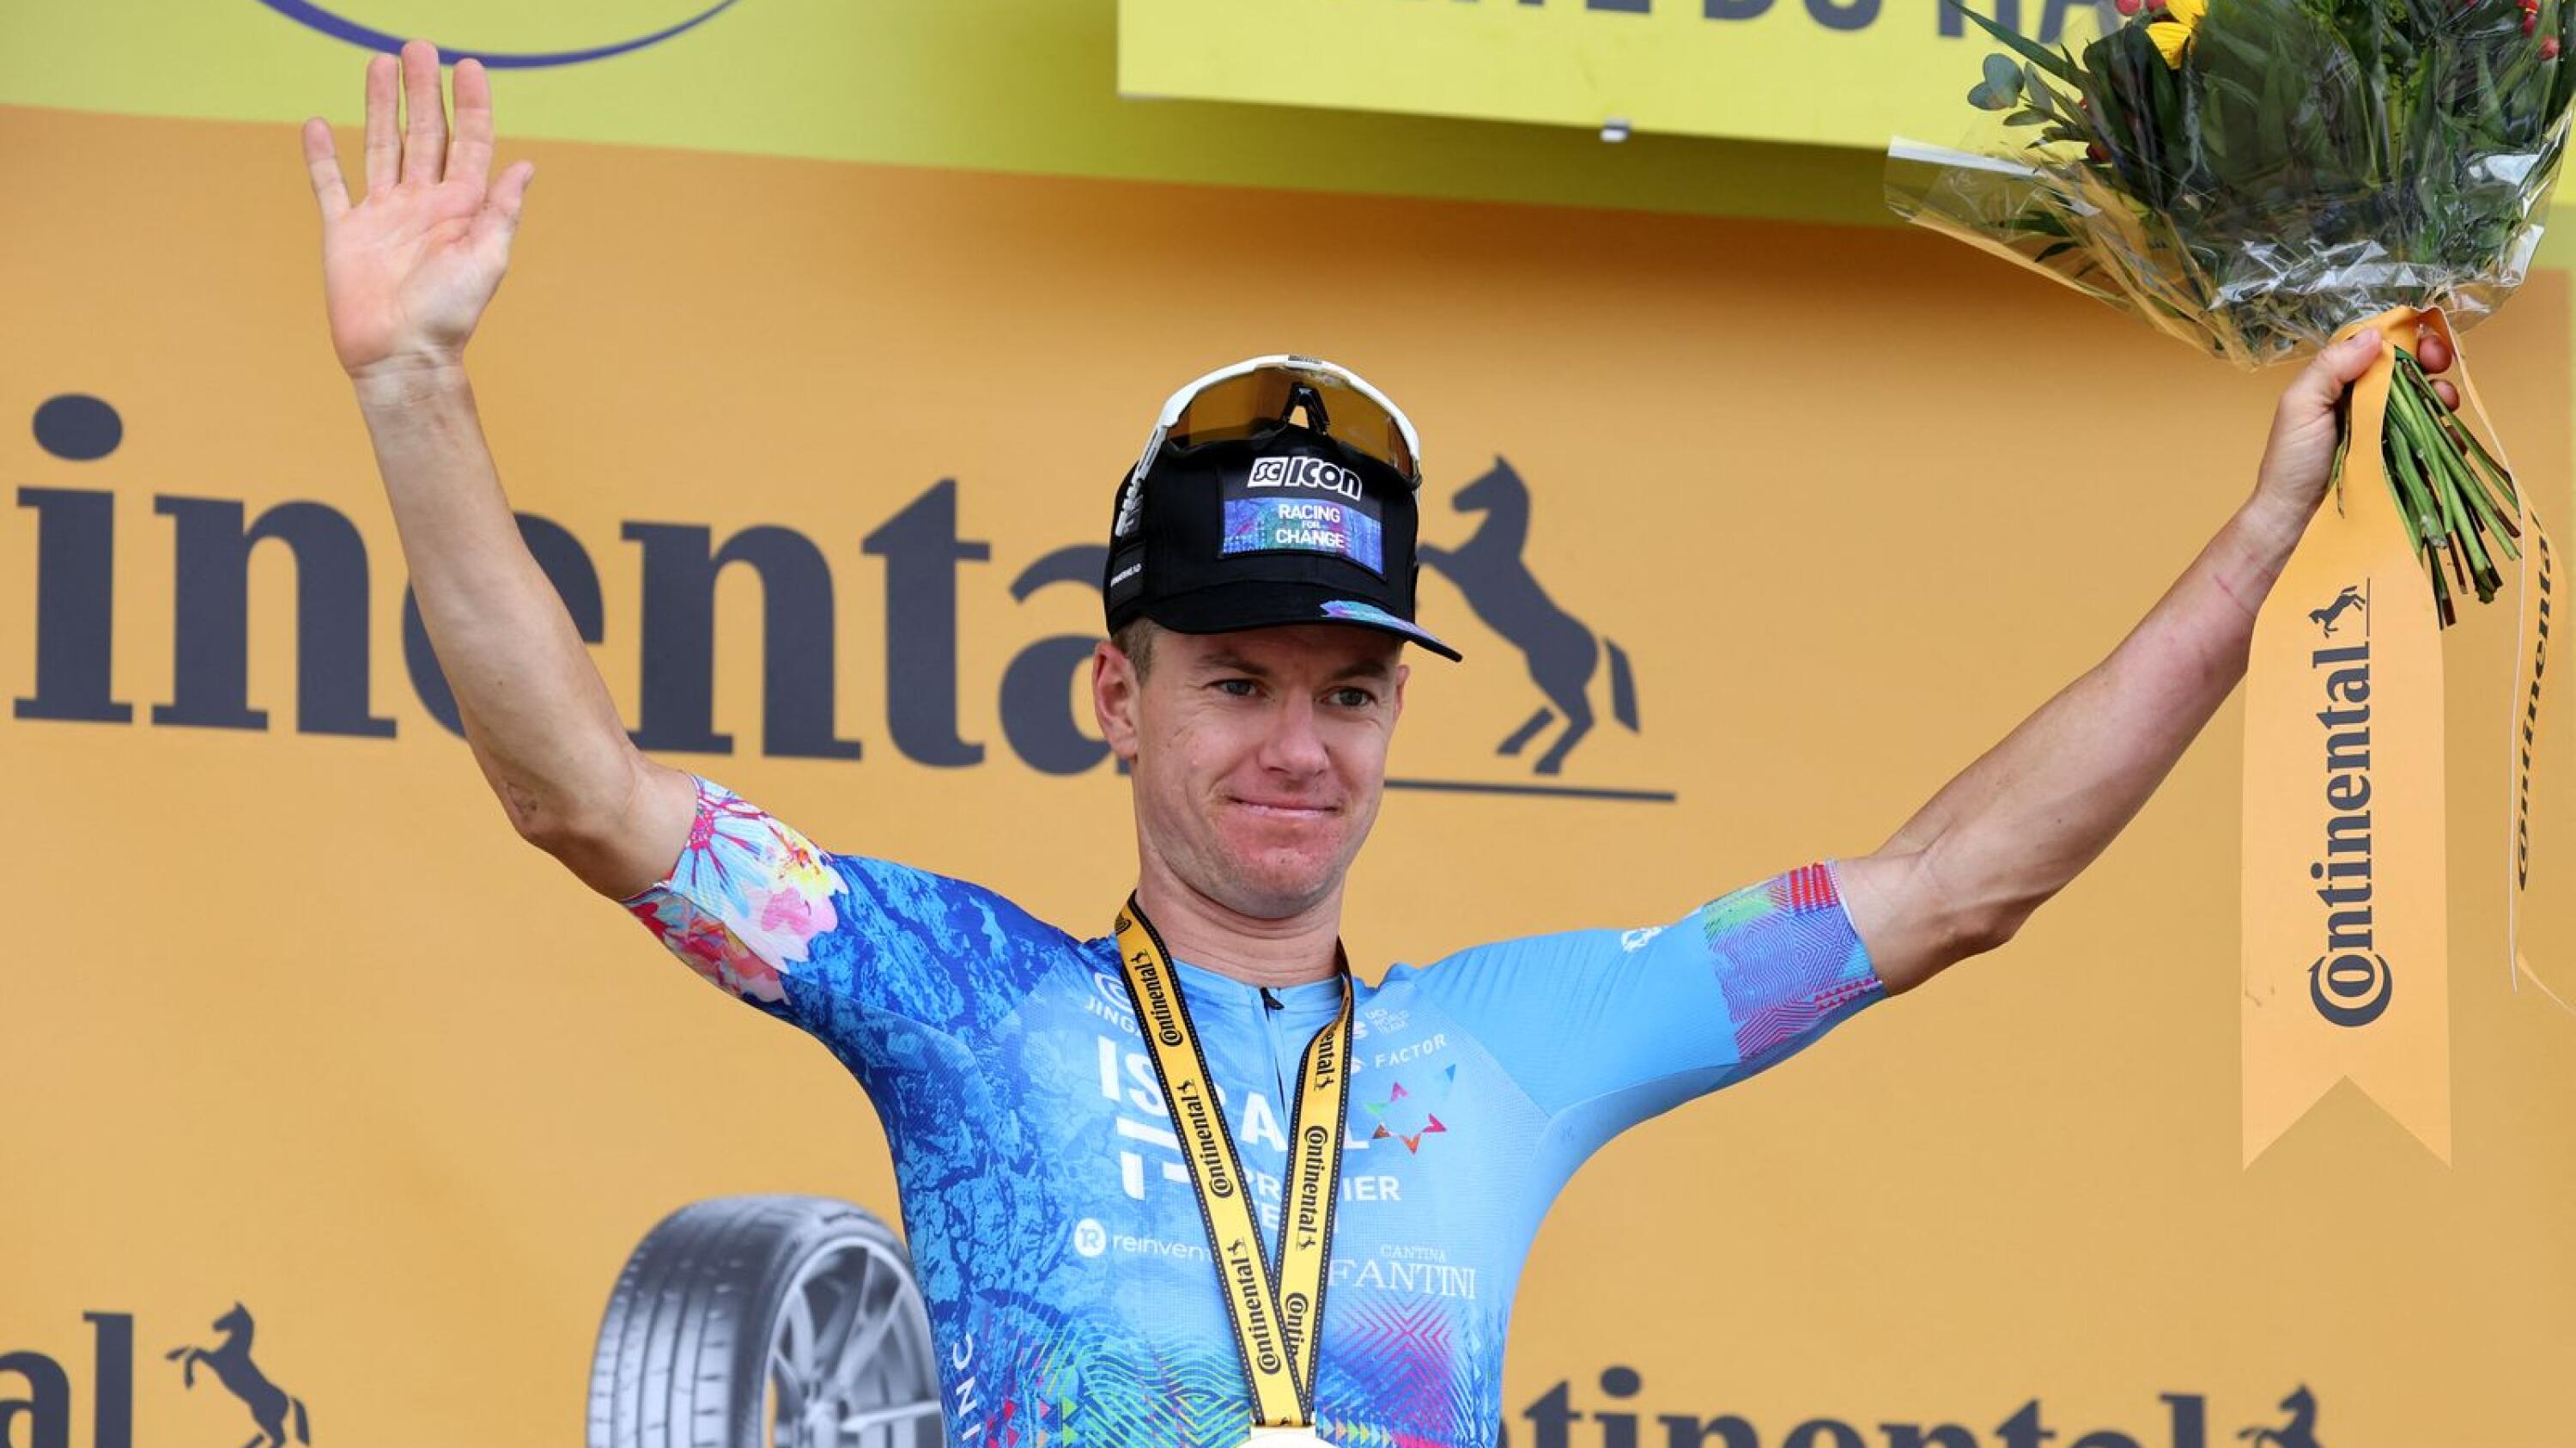 Israel-Premier Tech team's Australian rider Simon Clarke celebrates on the podium after winning the 5th stage of the 109th edition of the Tour de France cycling race, 153,7 km between Lille and Arenberg Porte du Hainaut, in northern France, on Wednesday